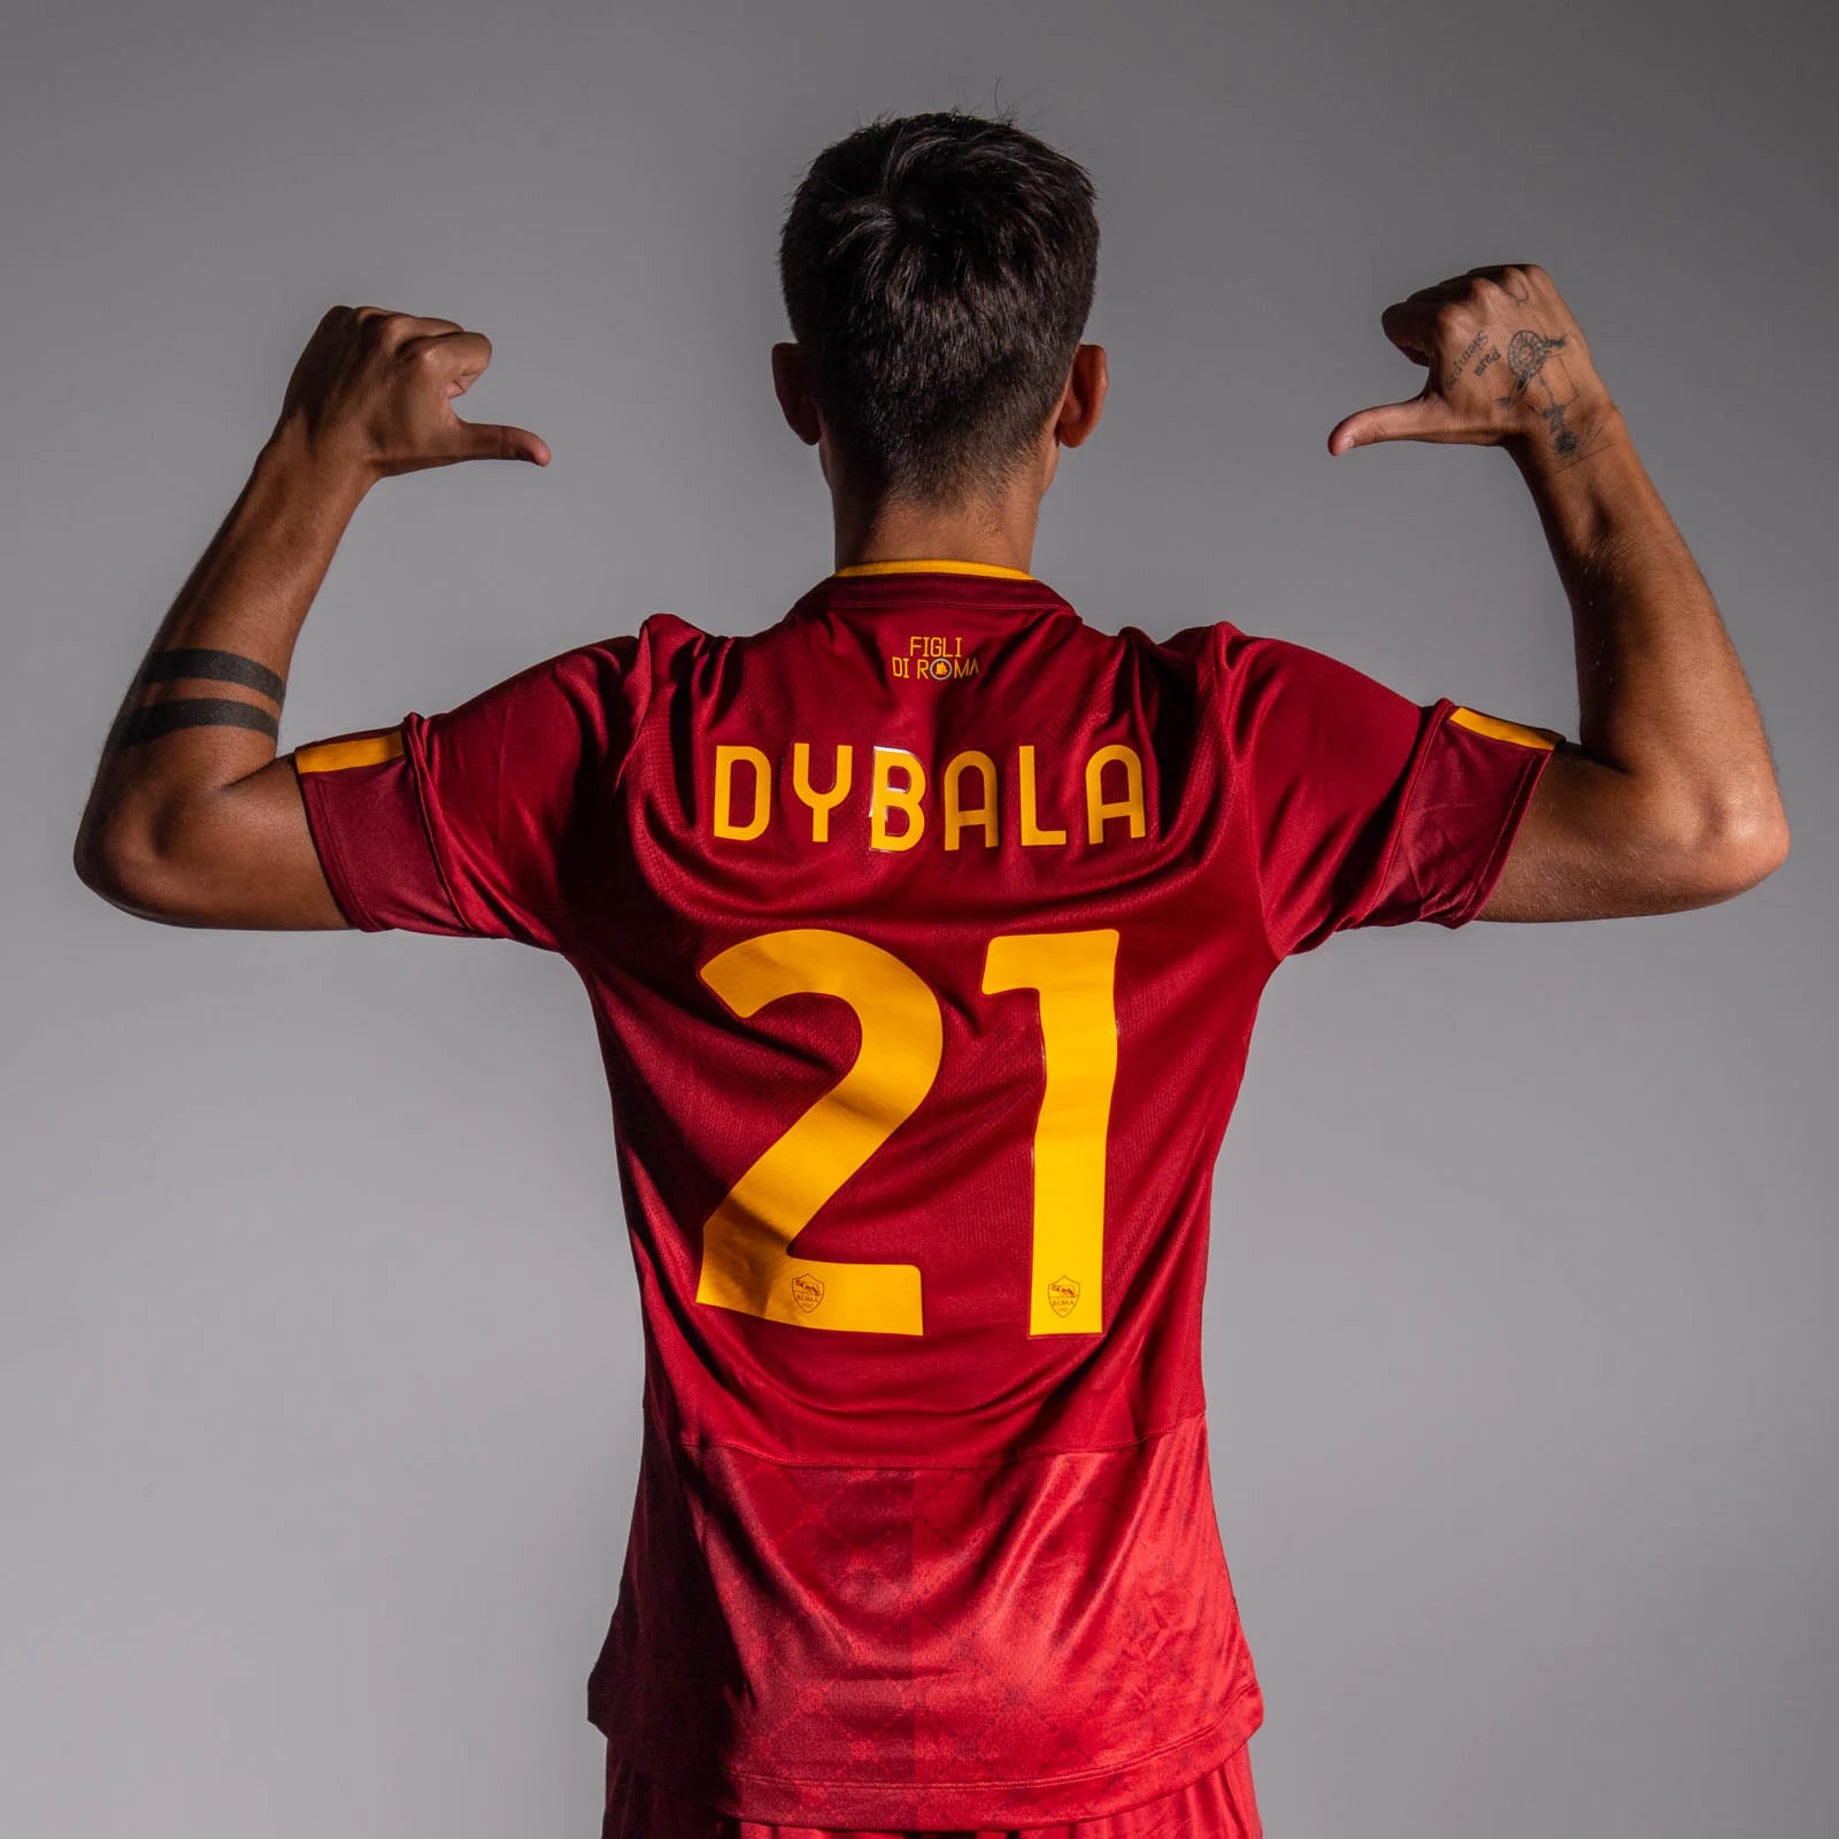 Dybala, Paulo - Official Number 21 Jersey - As Roma Store